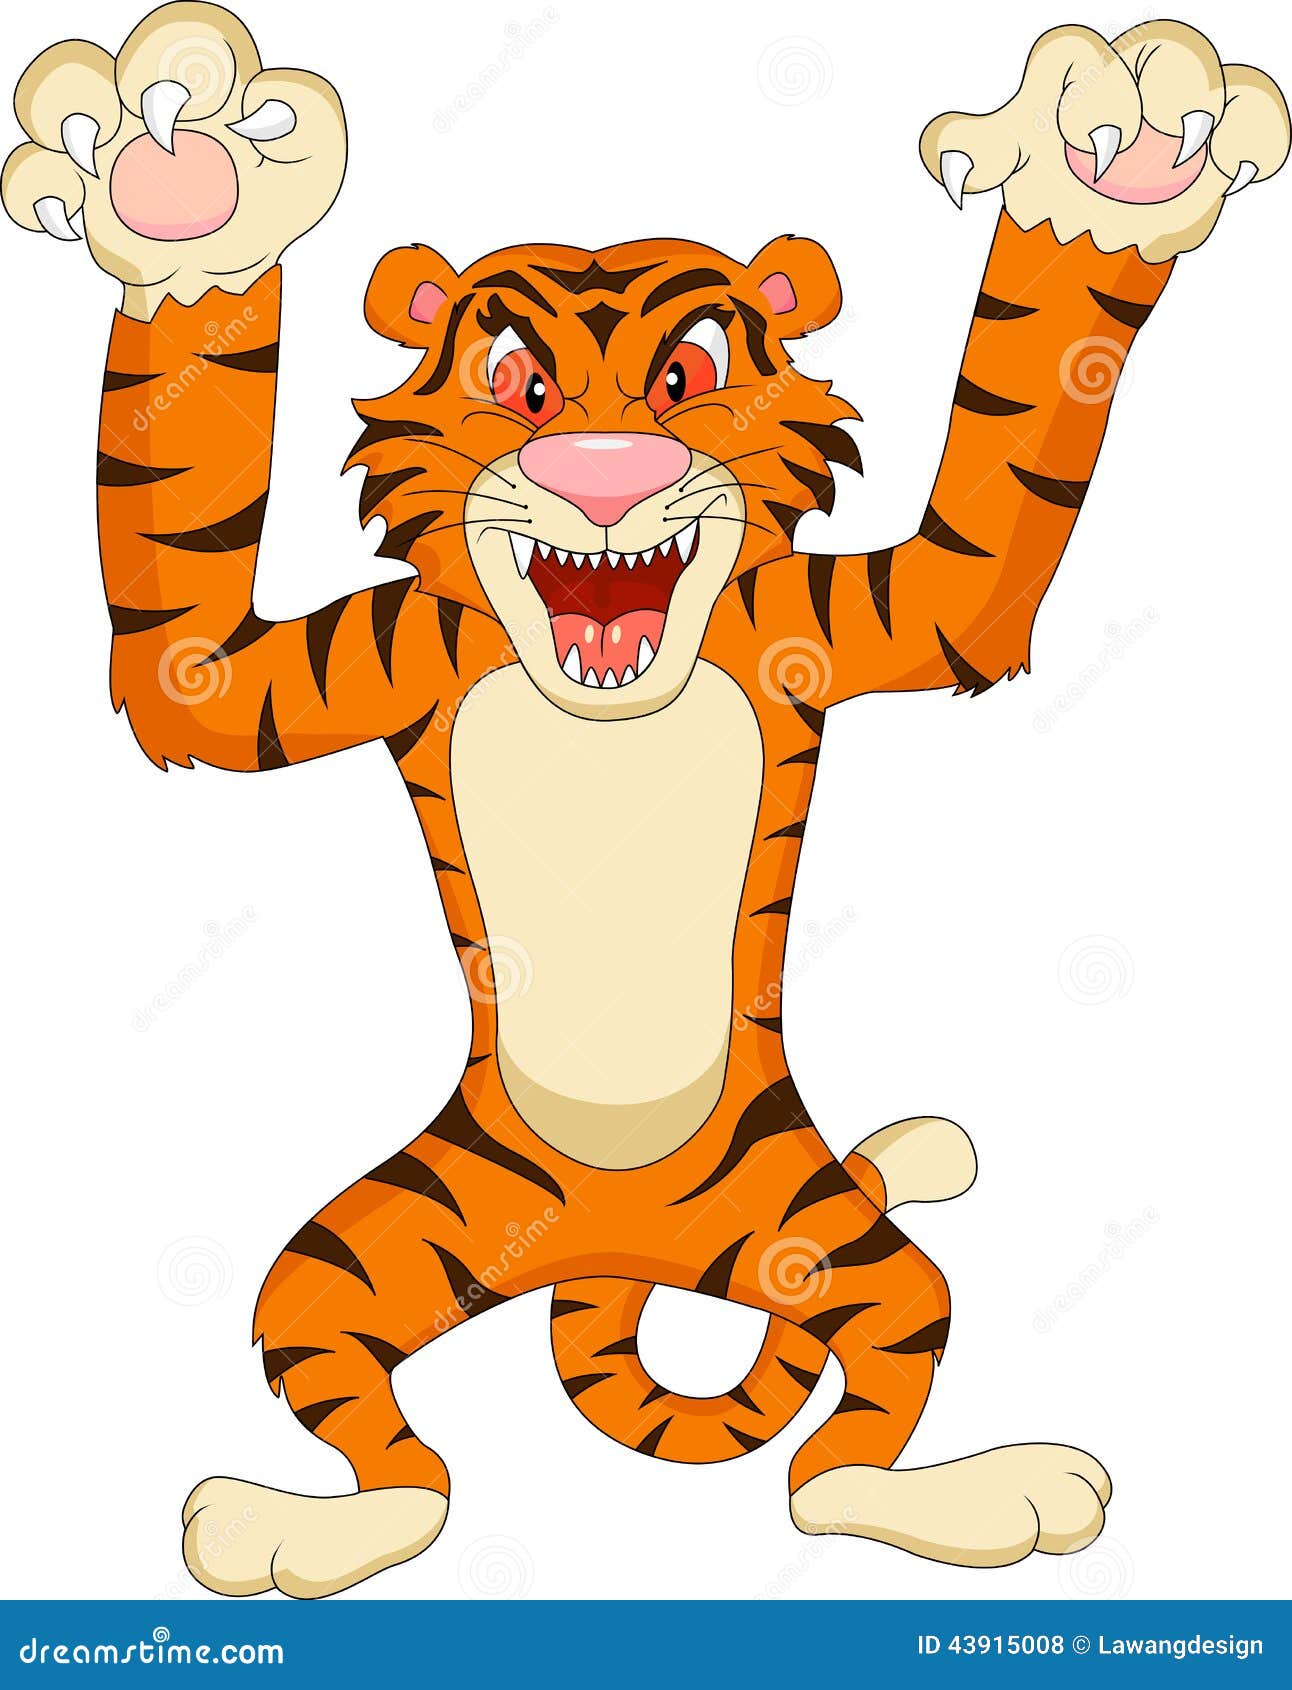 Tiger cartoon stock vector. Illustration of hungry, isolated - 43915008